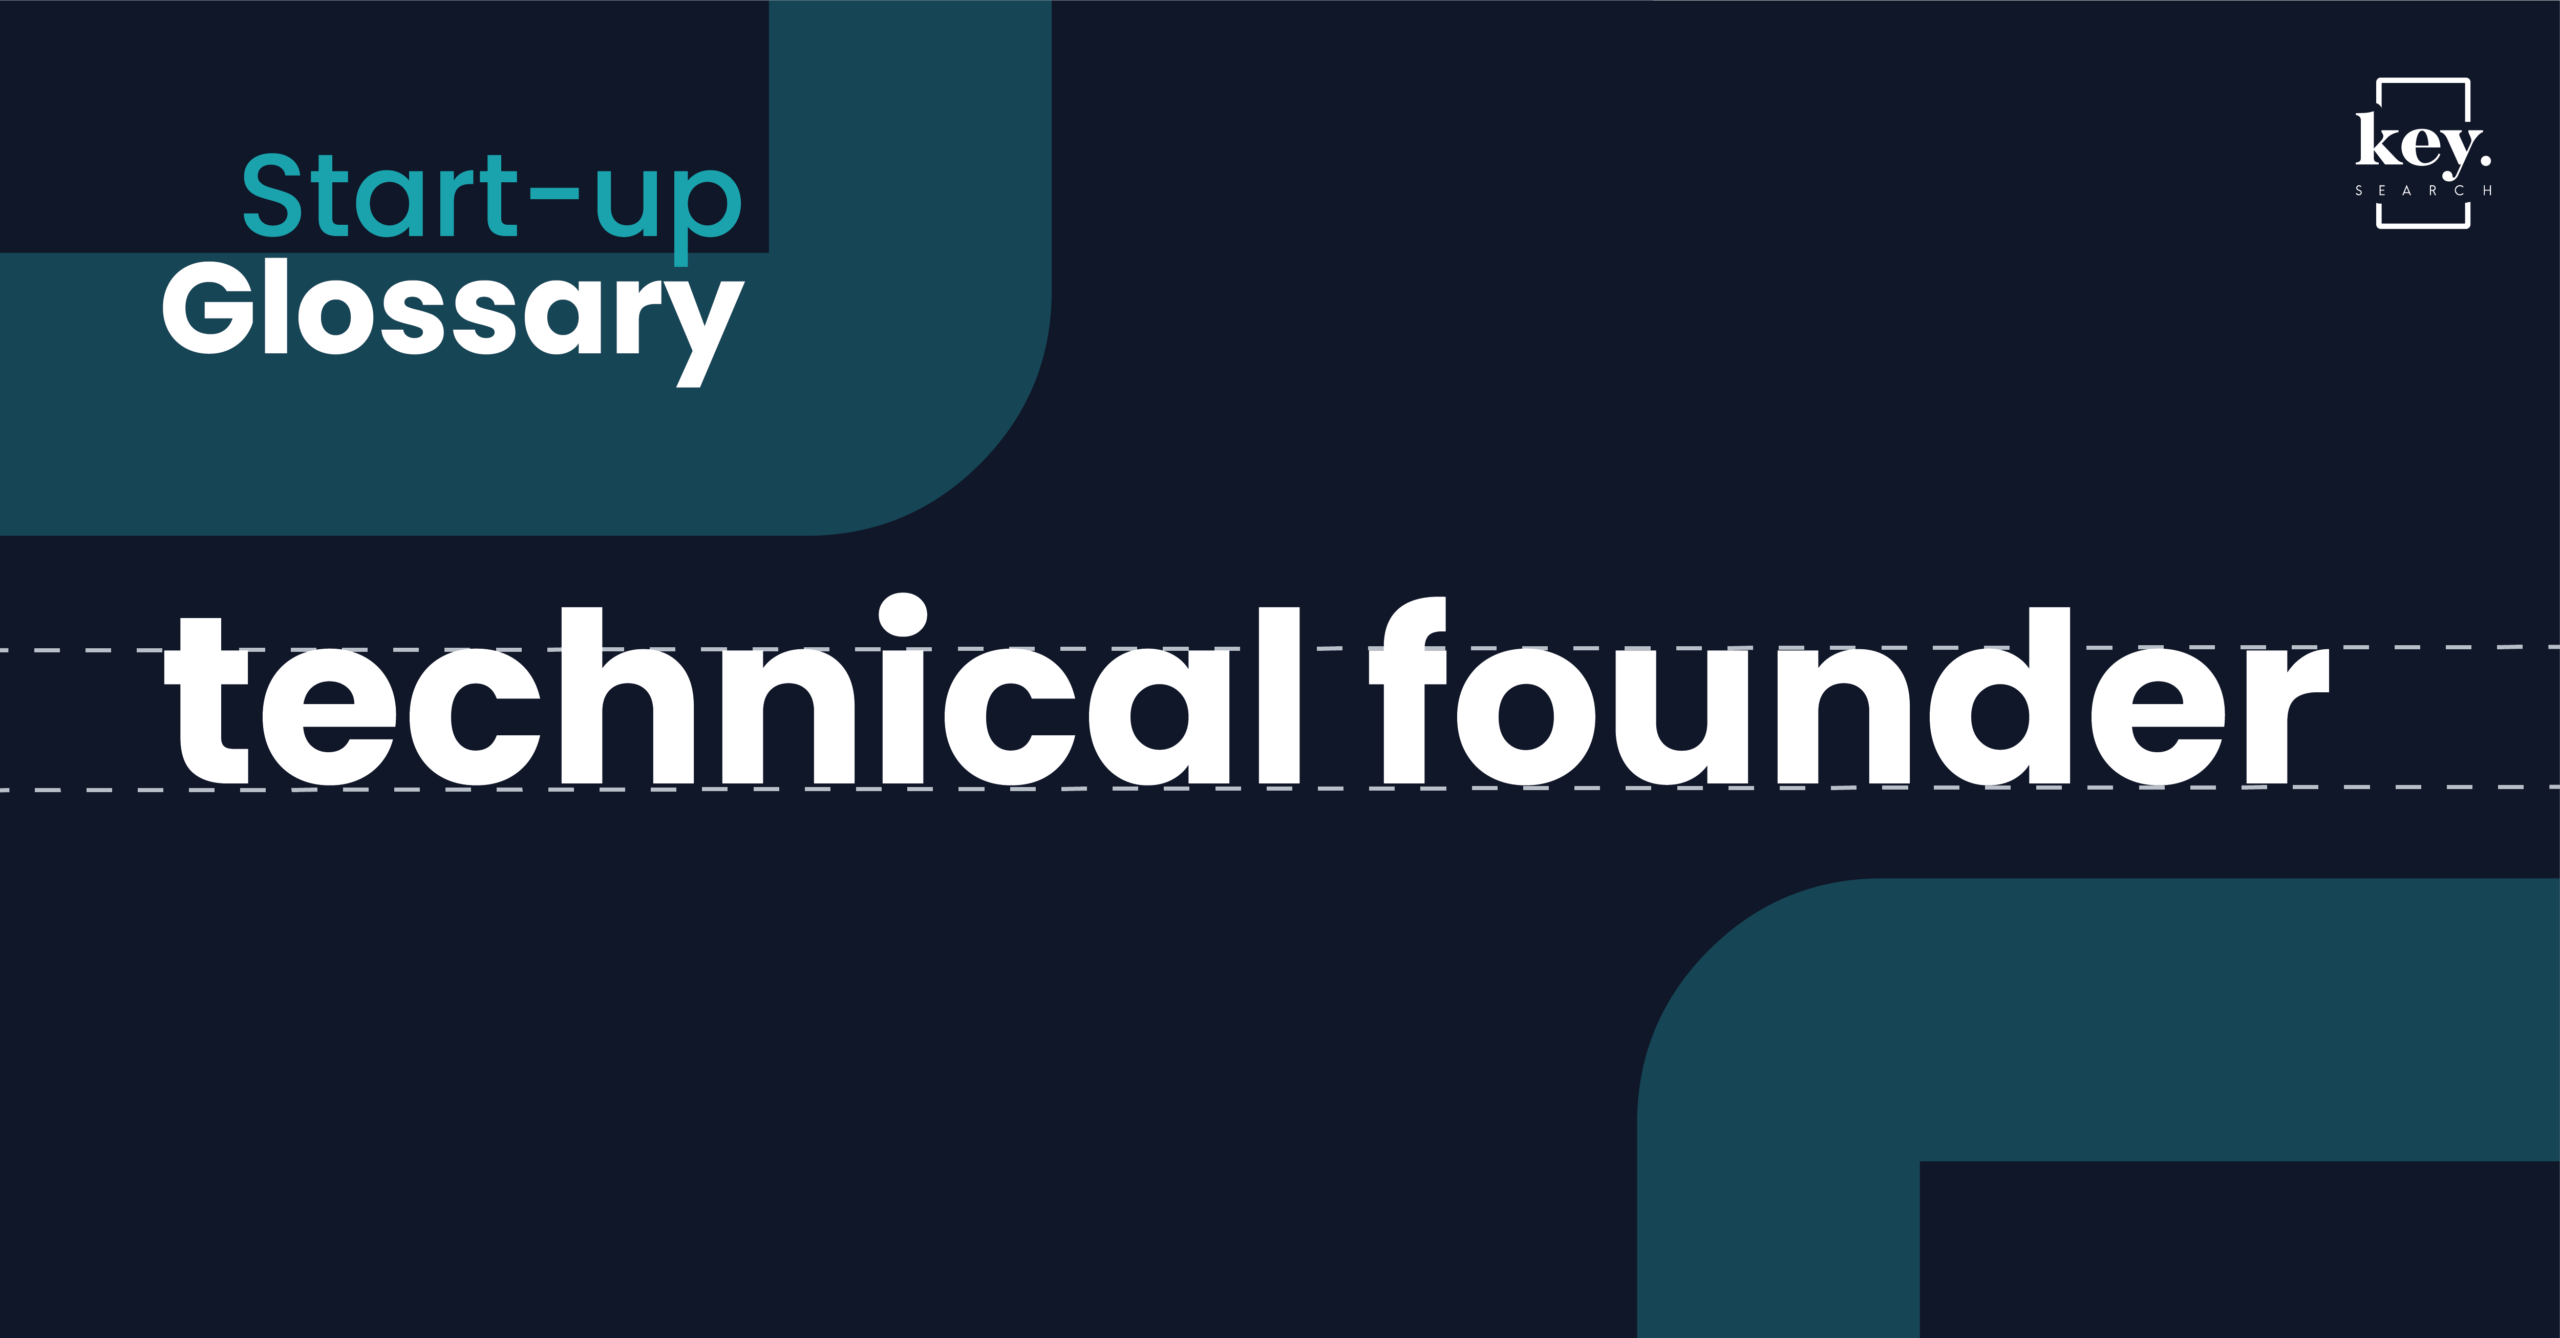 Start-up Glossary_Technical Founder